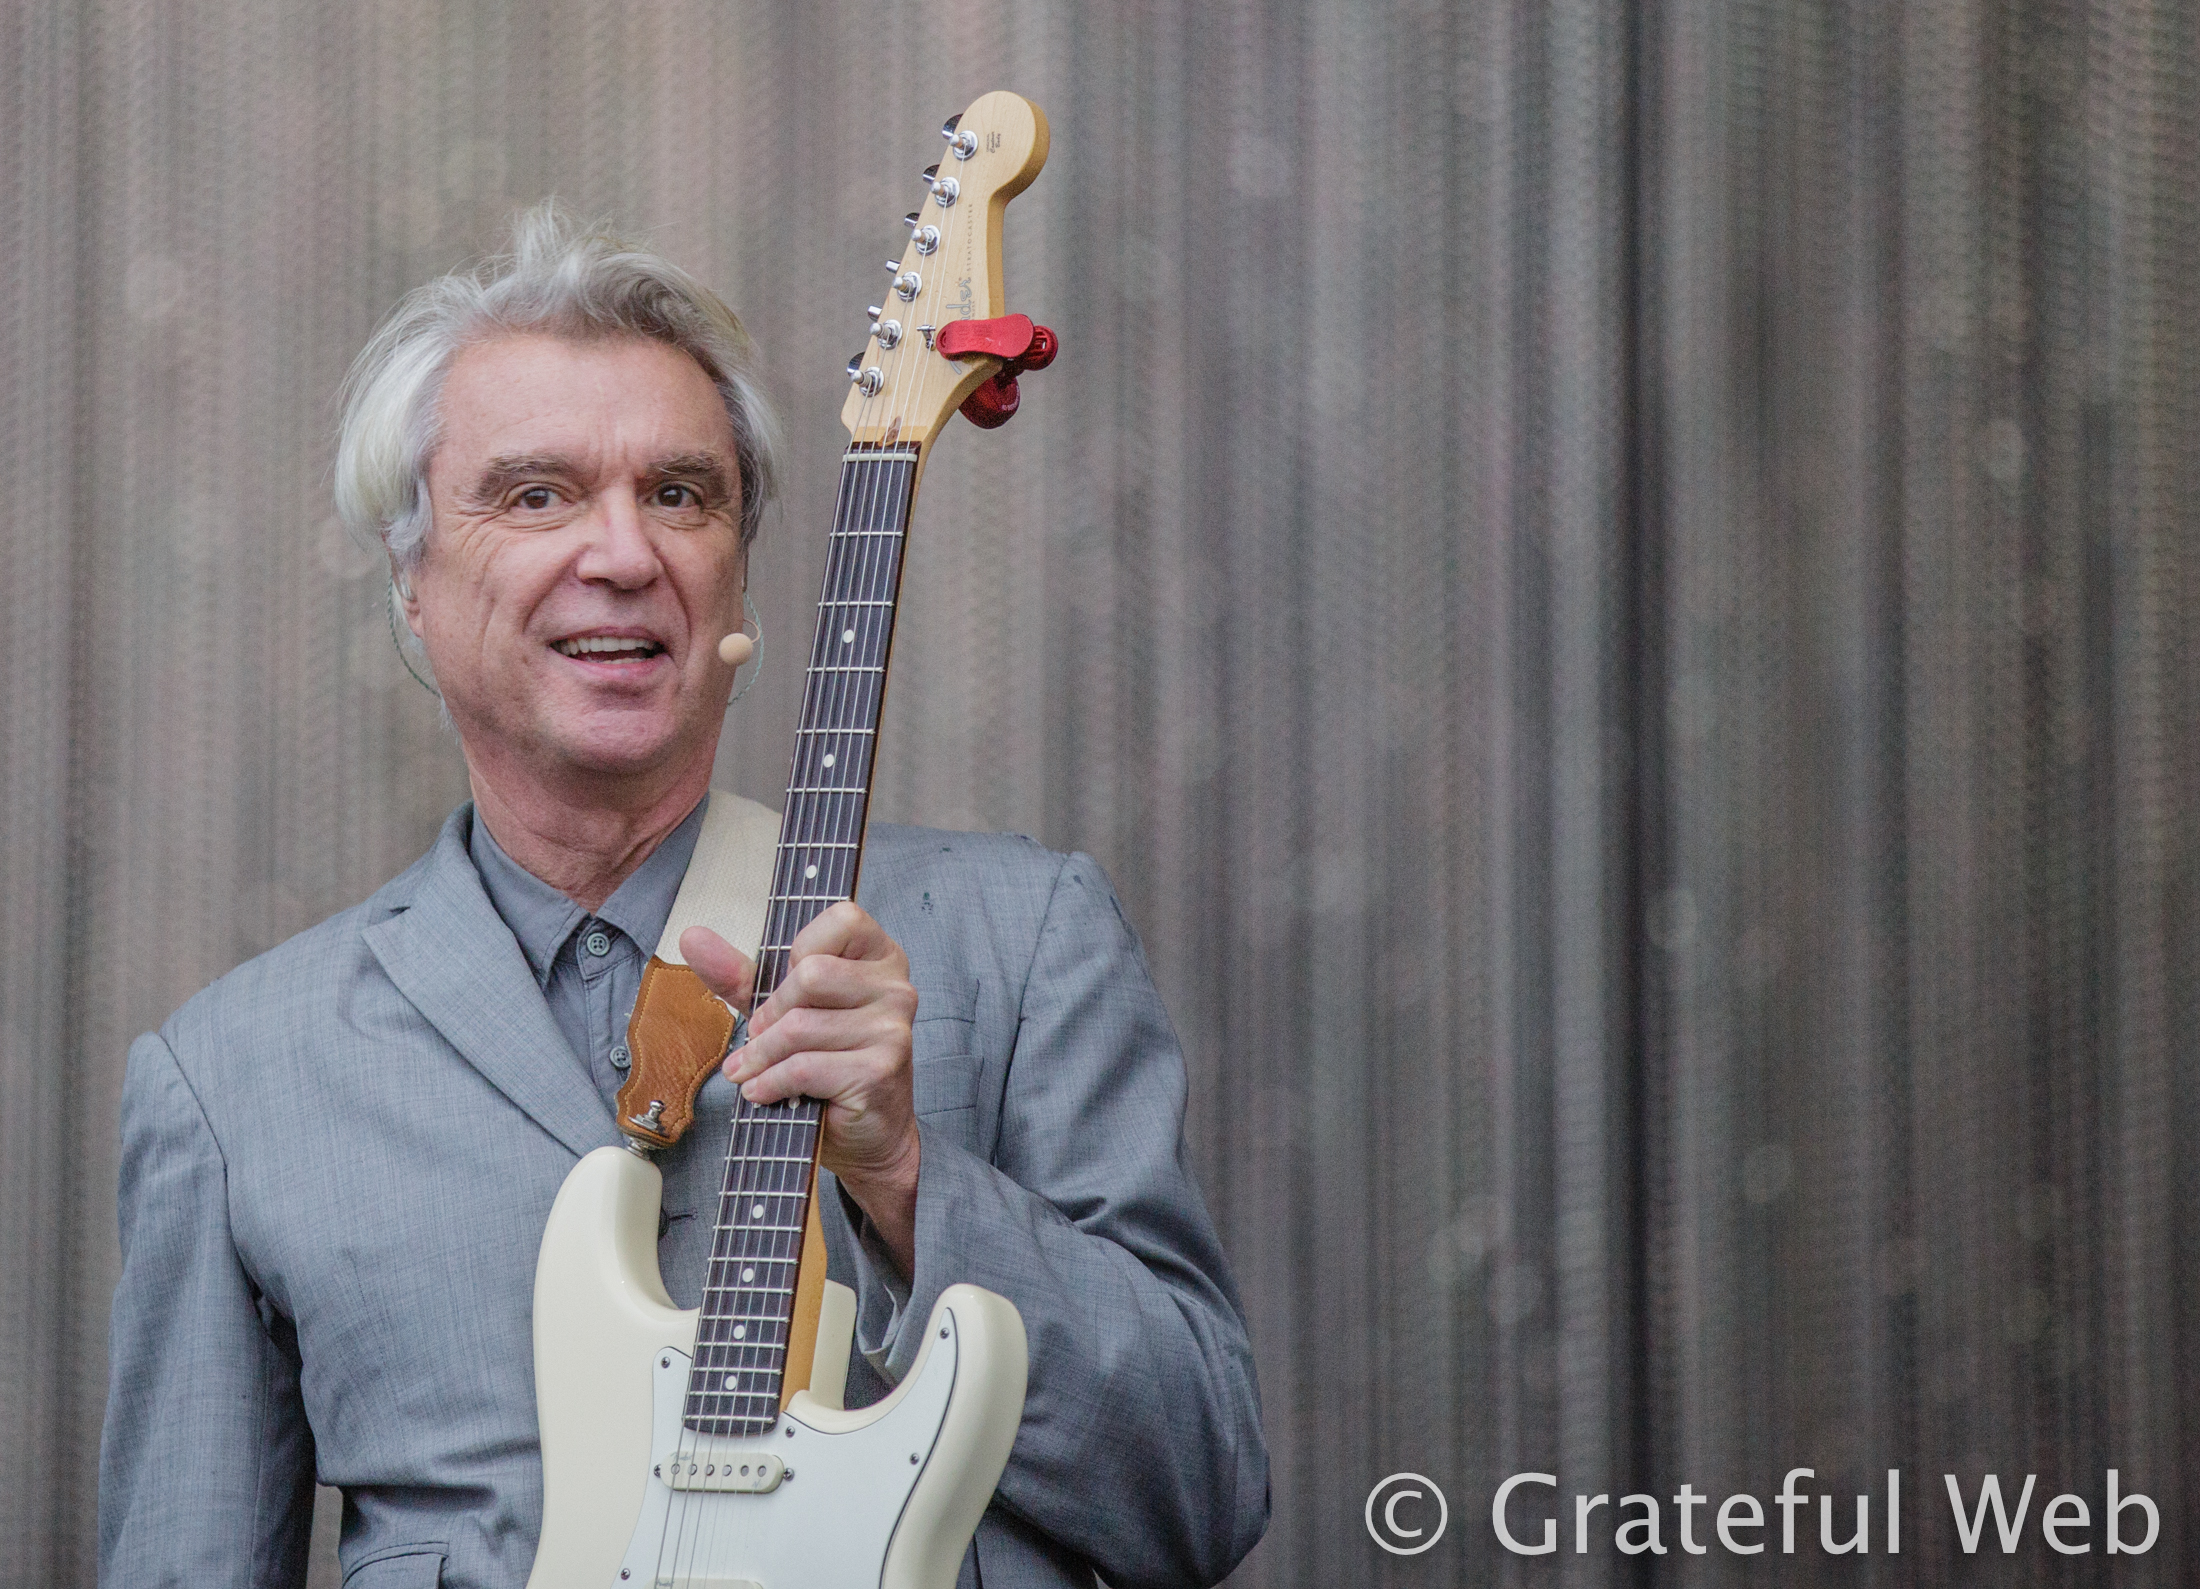 From Psycho Killer to Naive Melody: The Many Faces of David Byrne